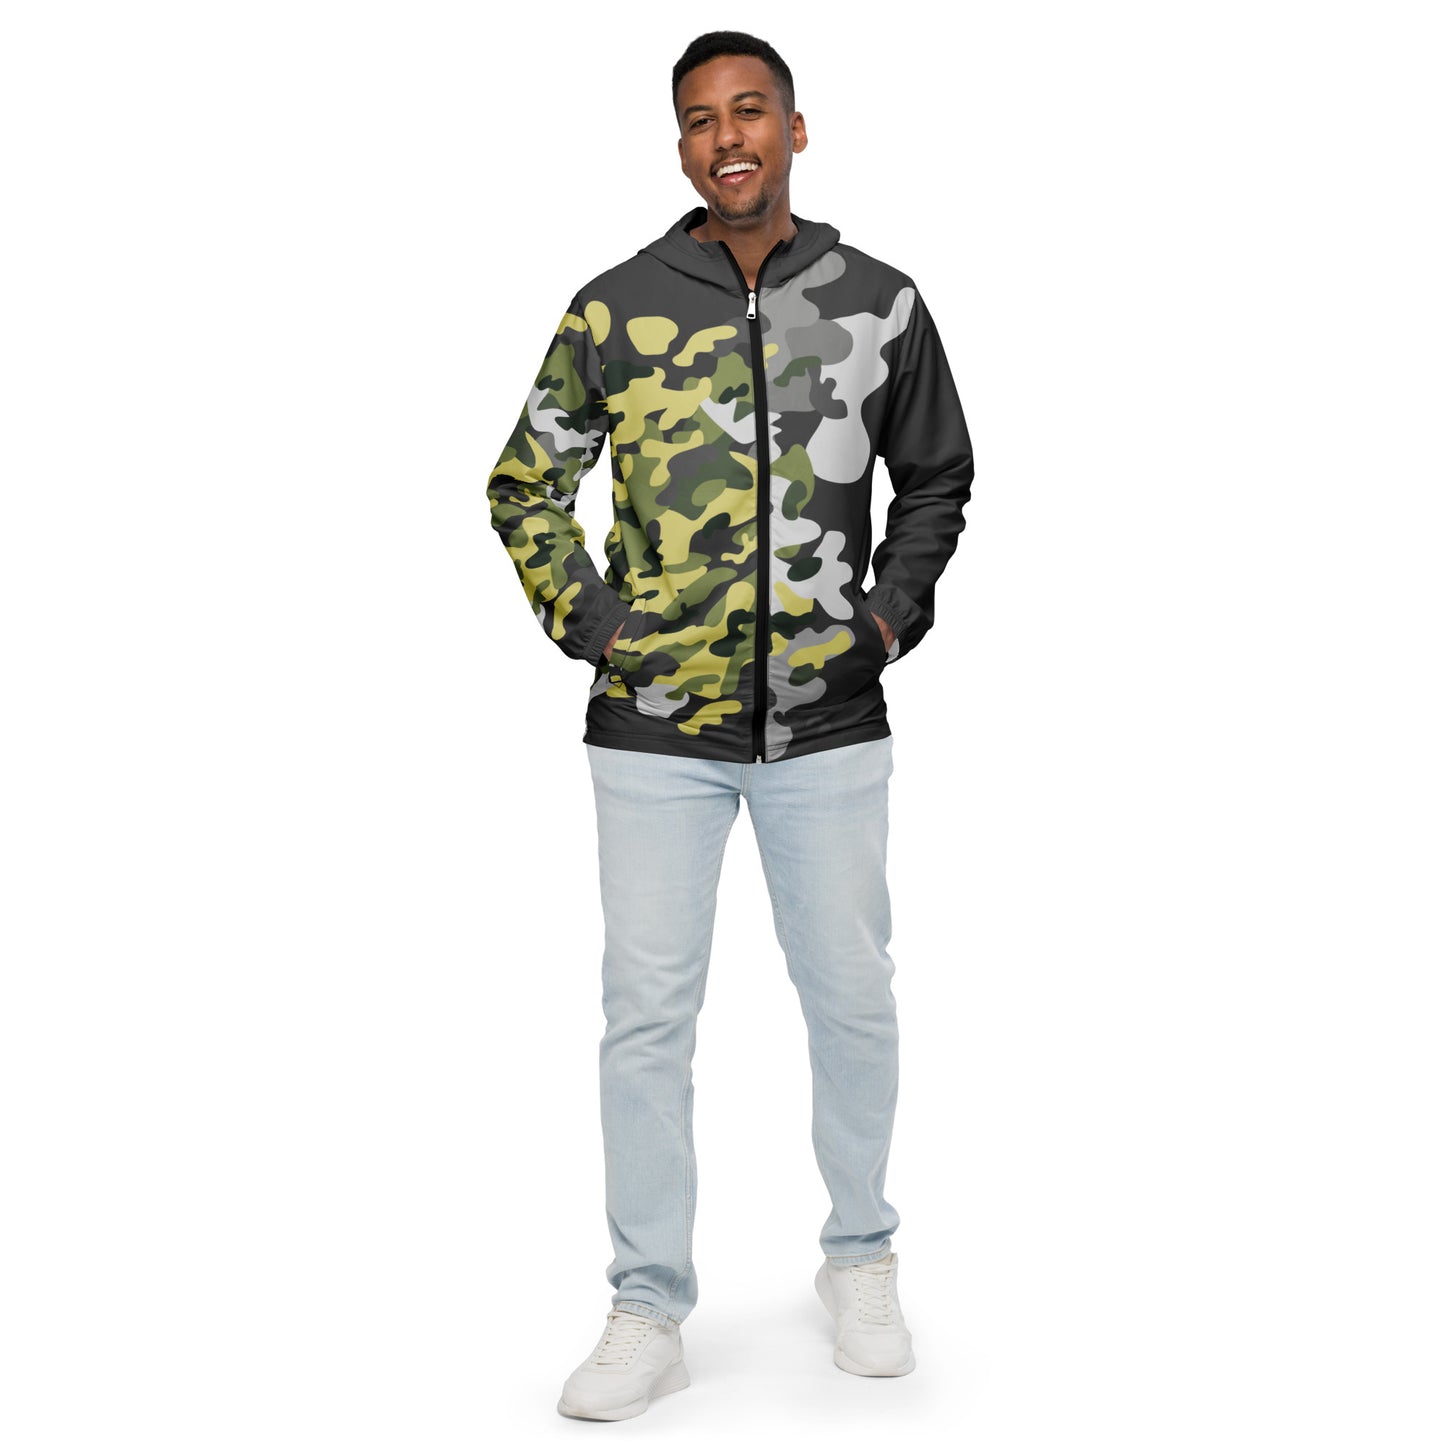 TIME OF VIBES - Men’s Windbreaker CAMOUFLAGE (Grey) - €99.00